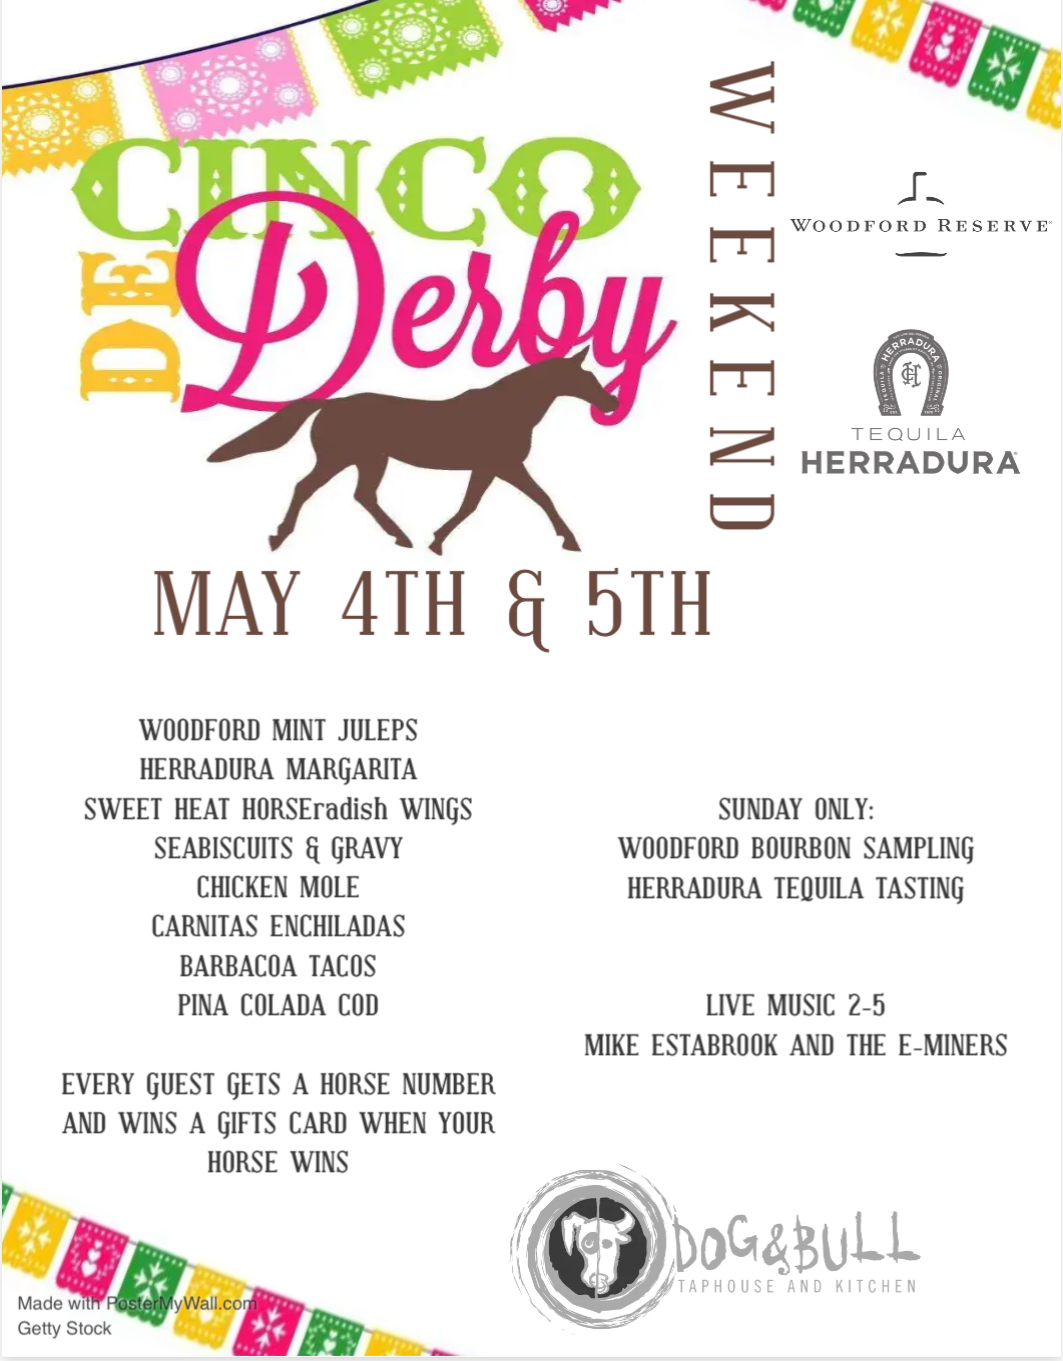 Colorful flyer for a cinco de derby weekend event featuring mixed drink specials, a bourbon and tequila tasting, live music, and various activities.